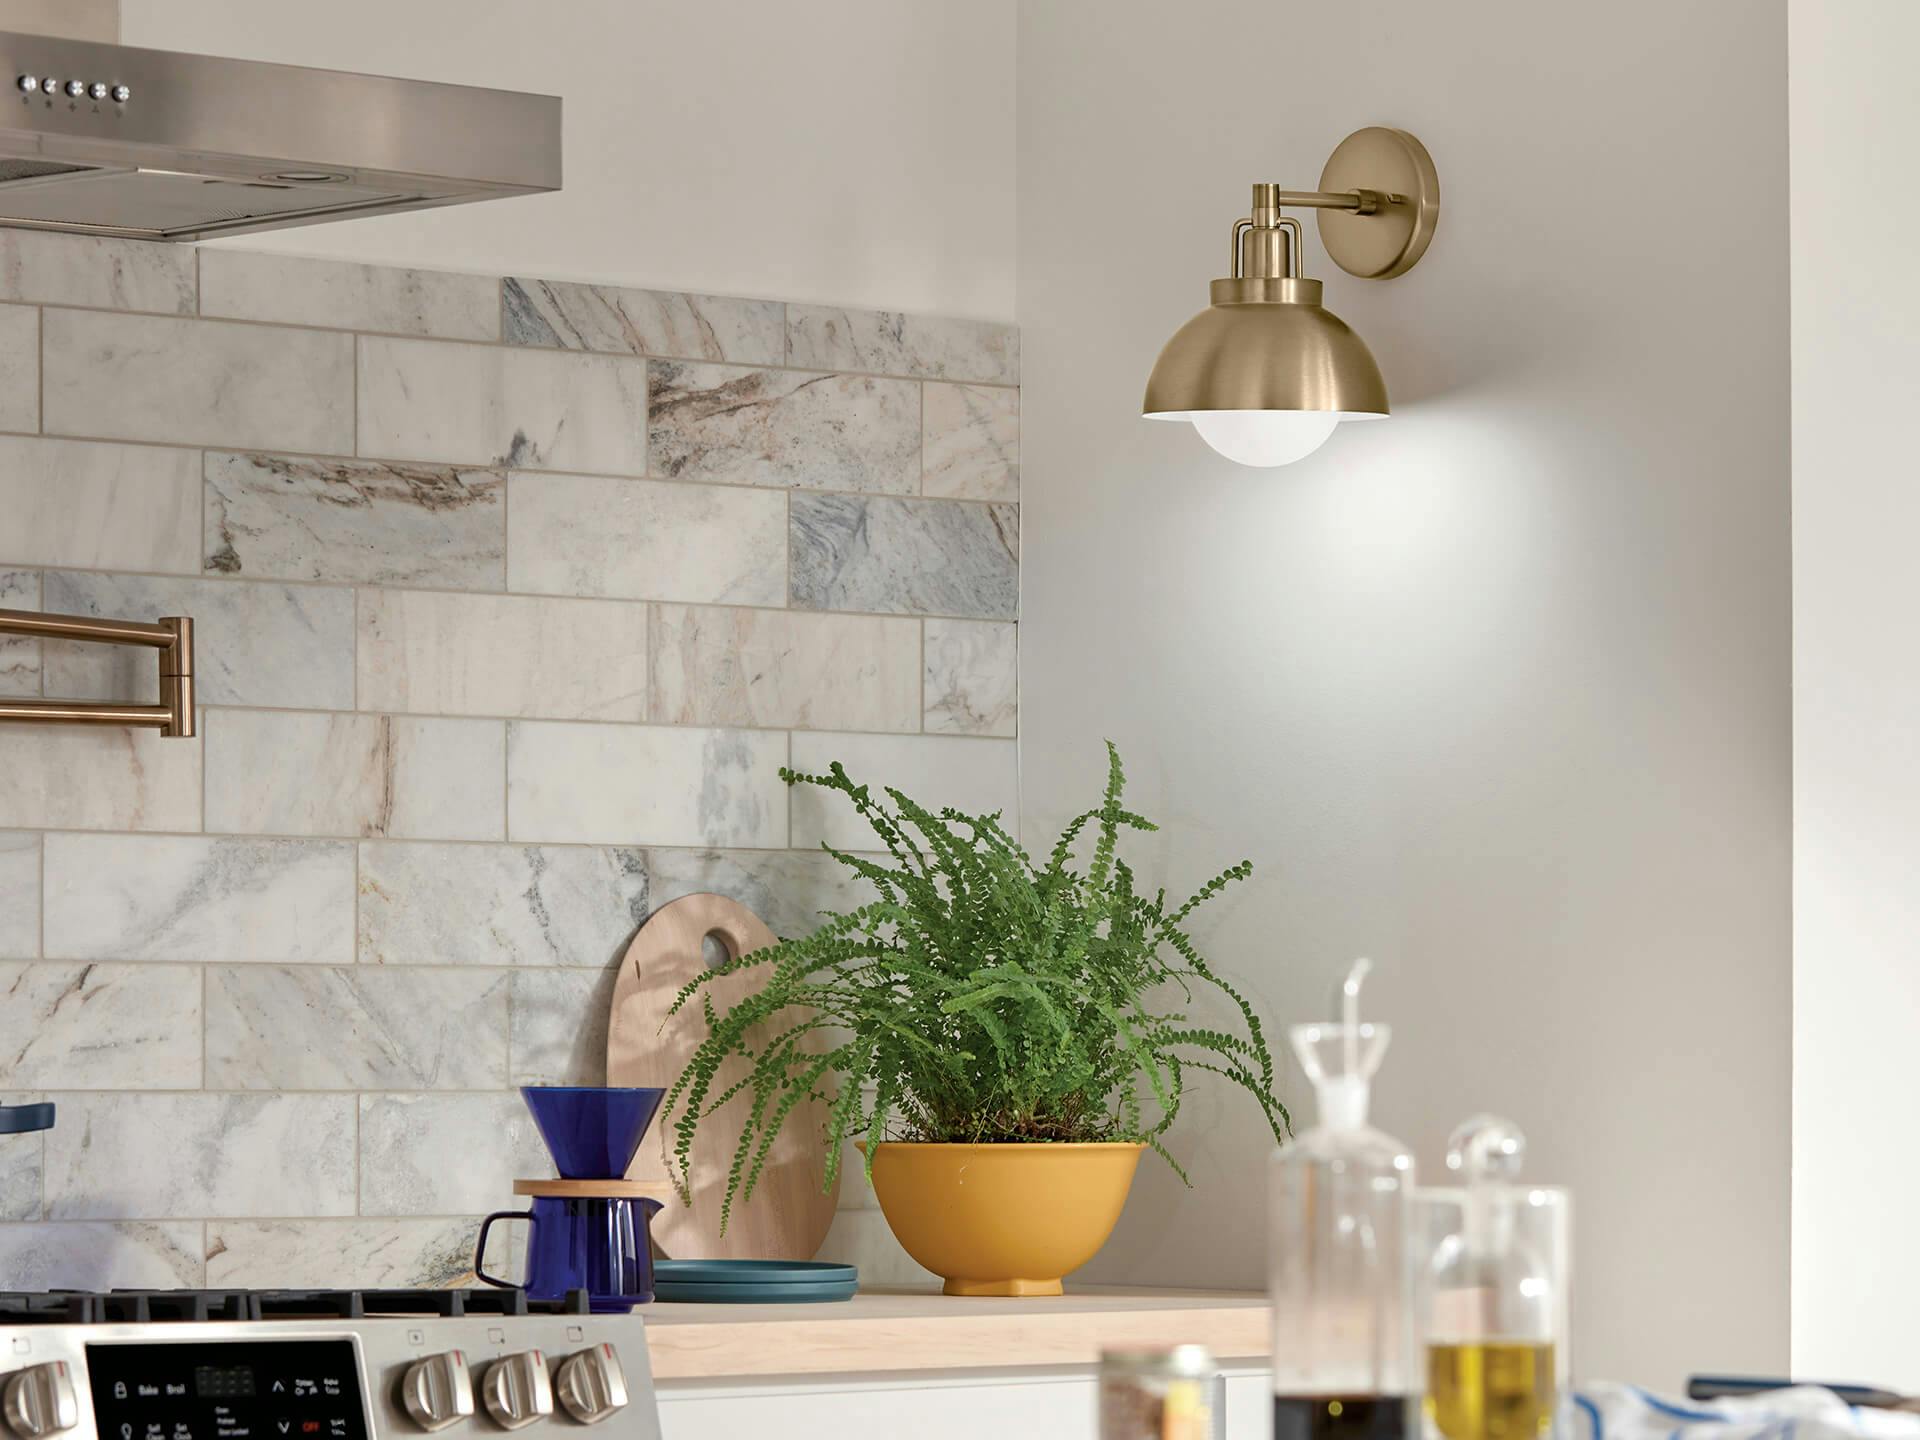 Kitchen focused on a Niva sconce in champagne bronze illuminating the countertop below